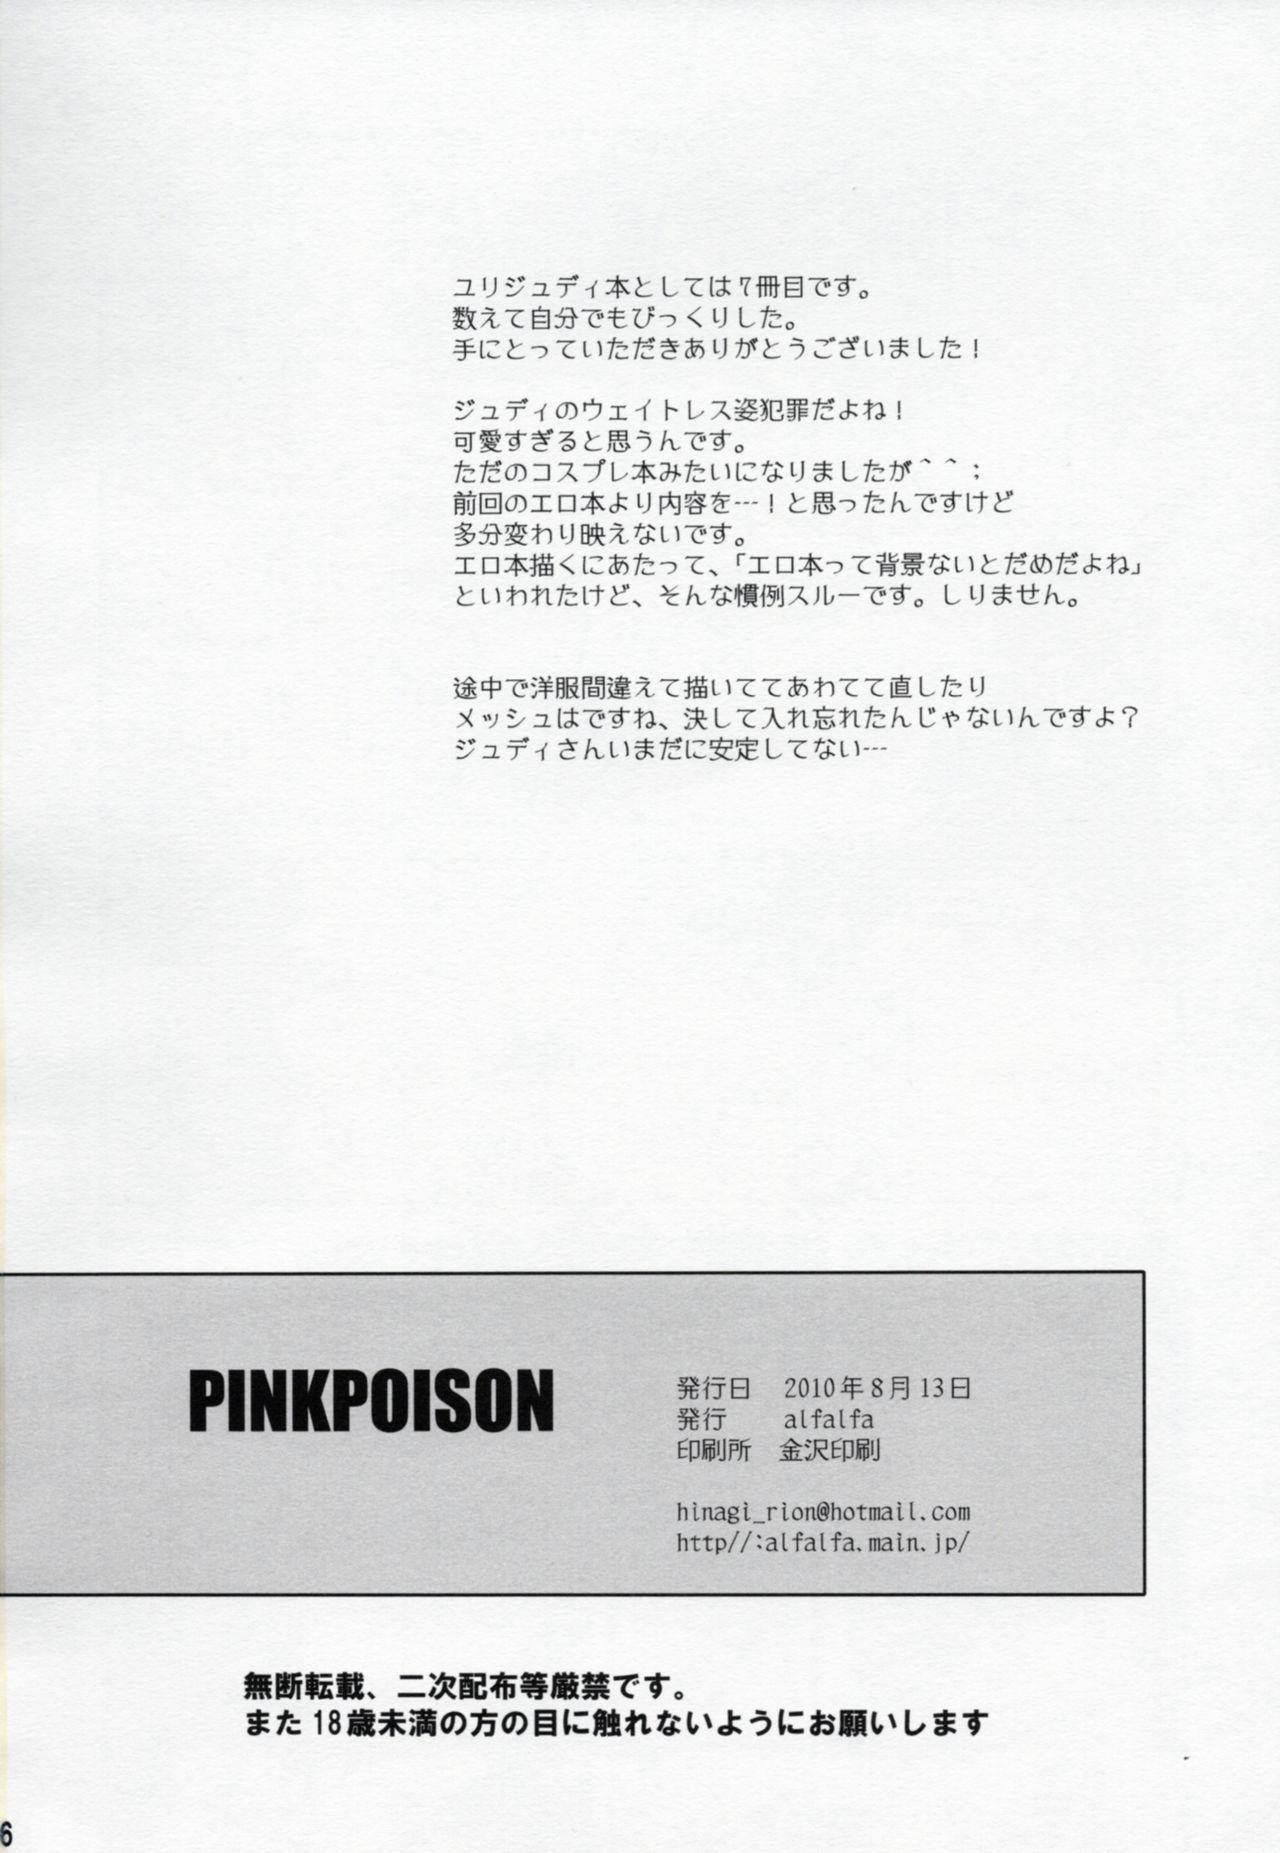 PINKPOISON 24